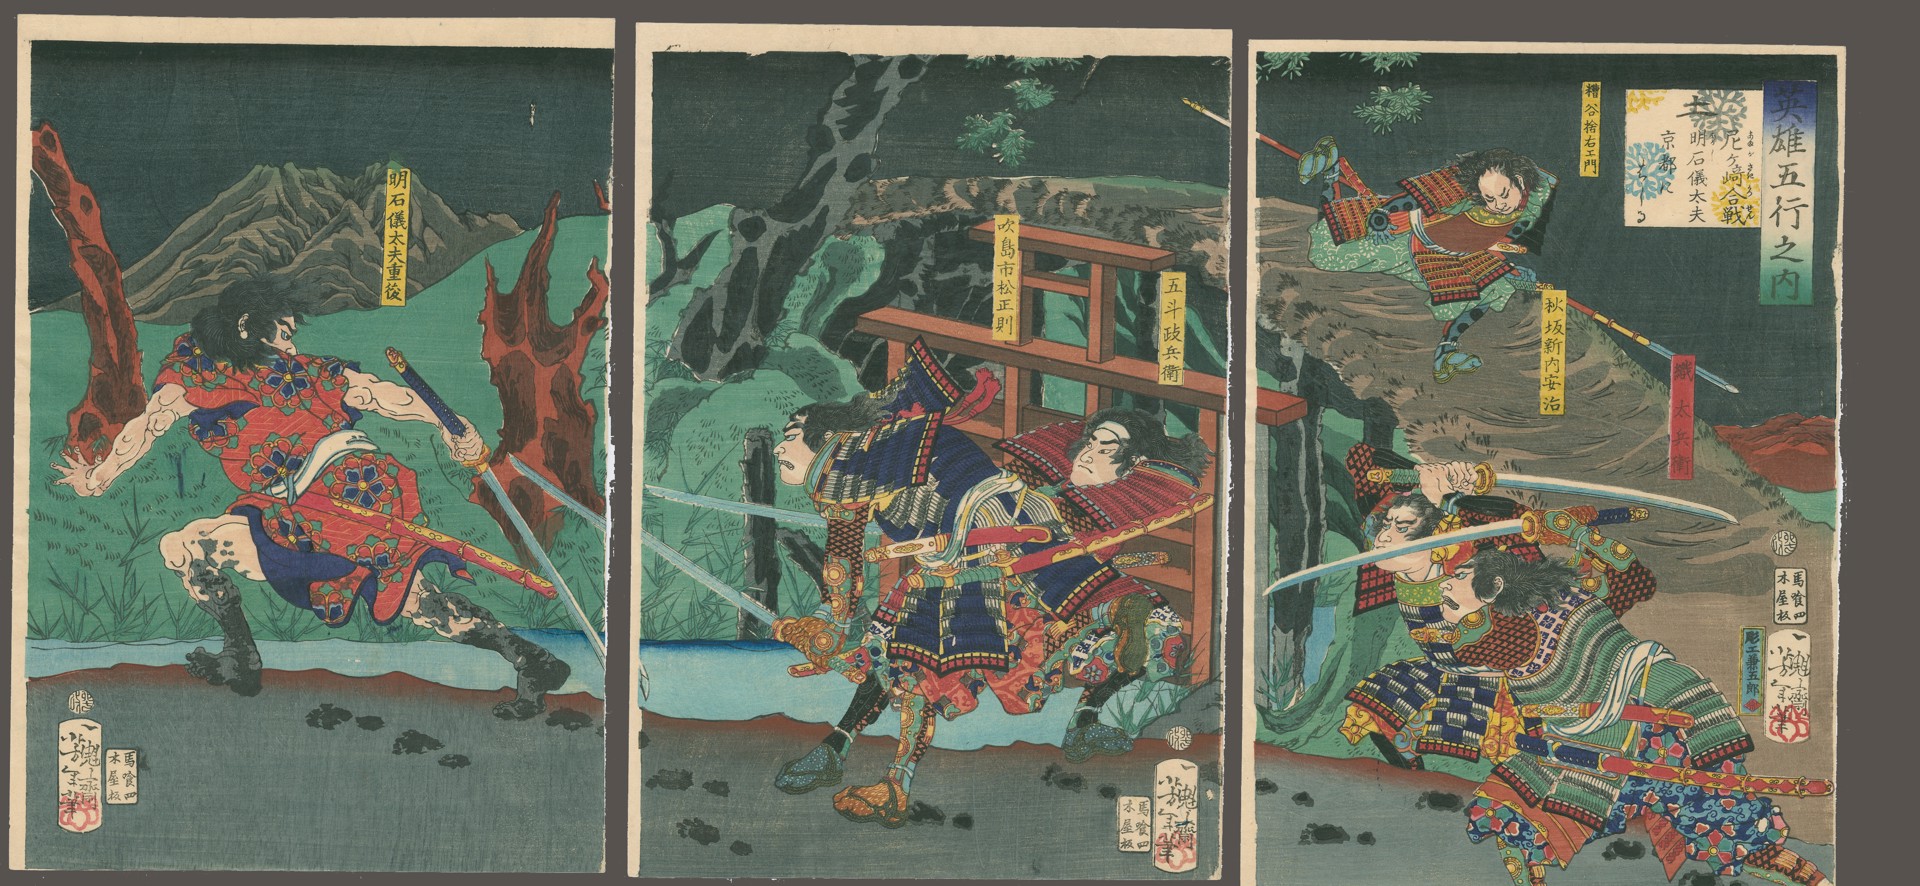 Earth: Akashi Gidayu Races to Kyoto During the Battle of Amagasaki Heroes of the Five (5) Elements by Yoshitoshi